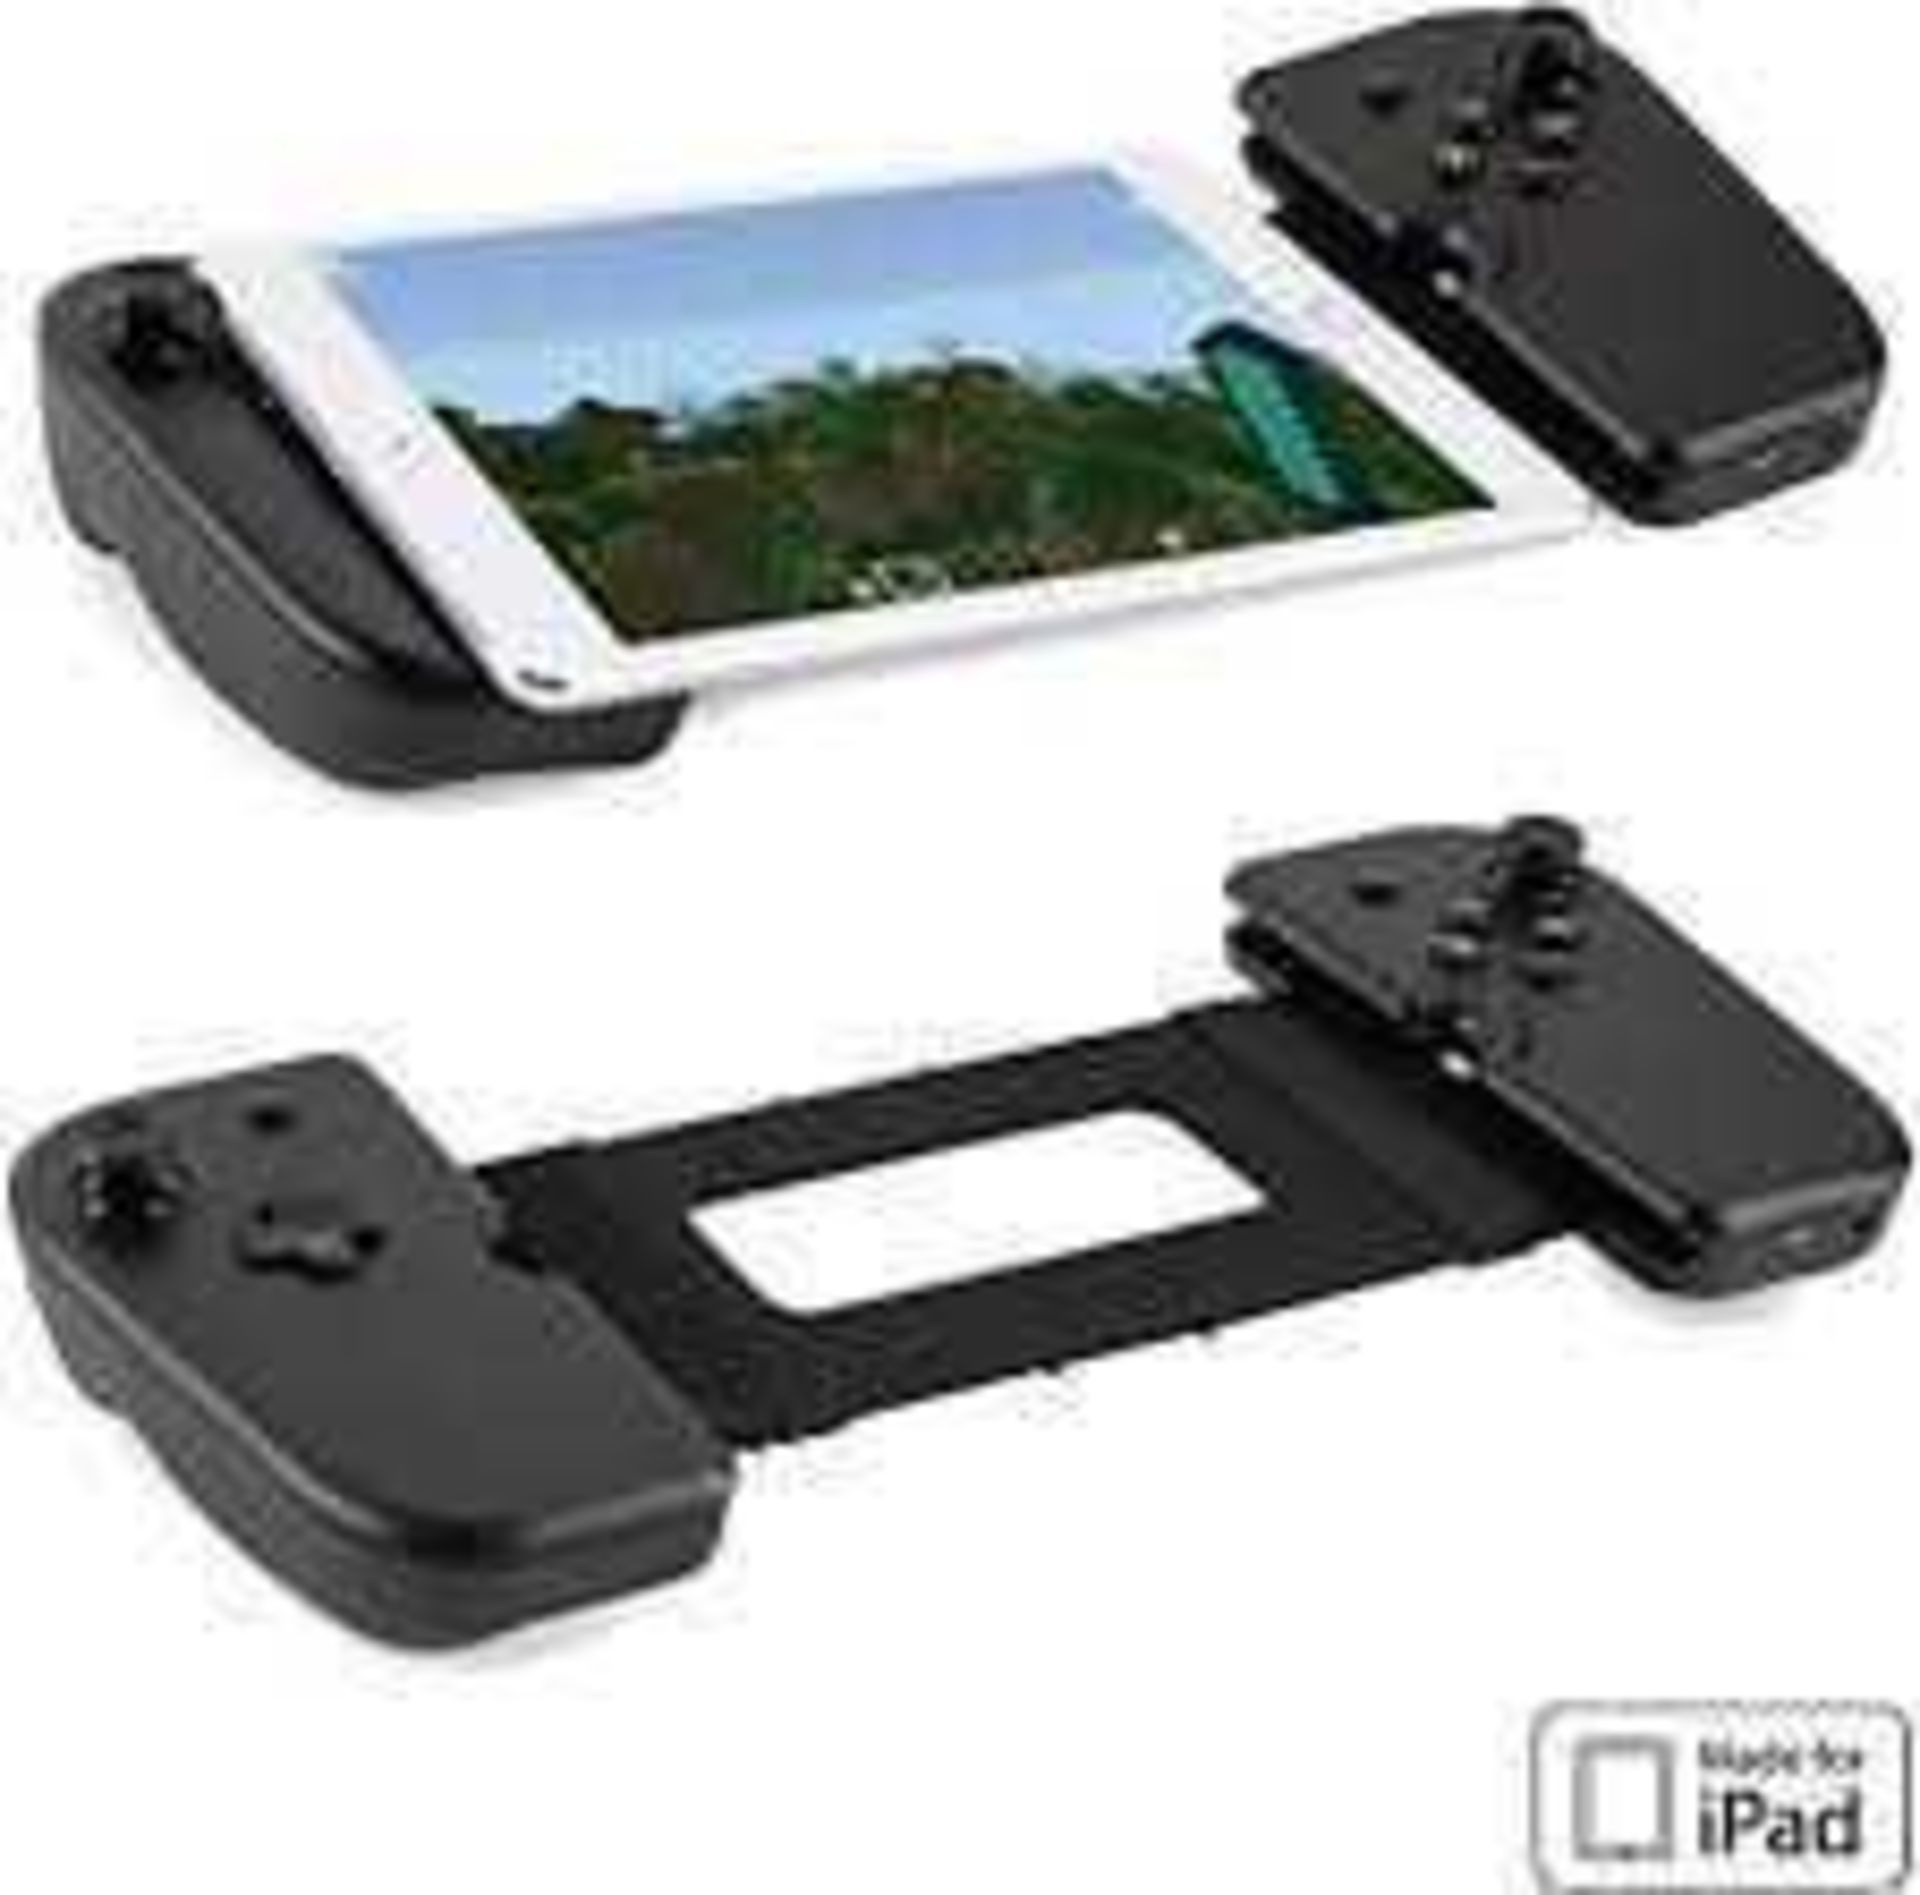 RRP £200 Lot To Contain 2 Boxed Game Vice Gaming Grip Controllers Compatible With Ipad Mini